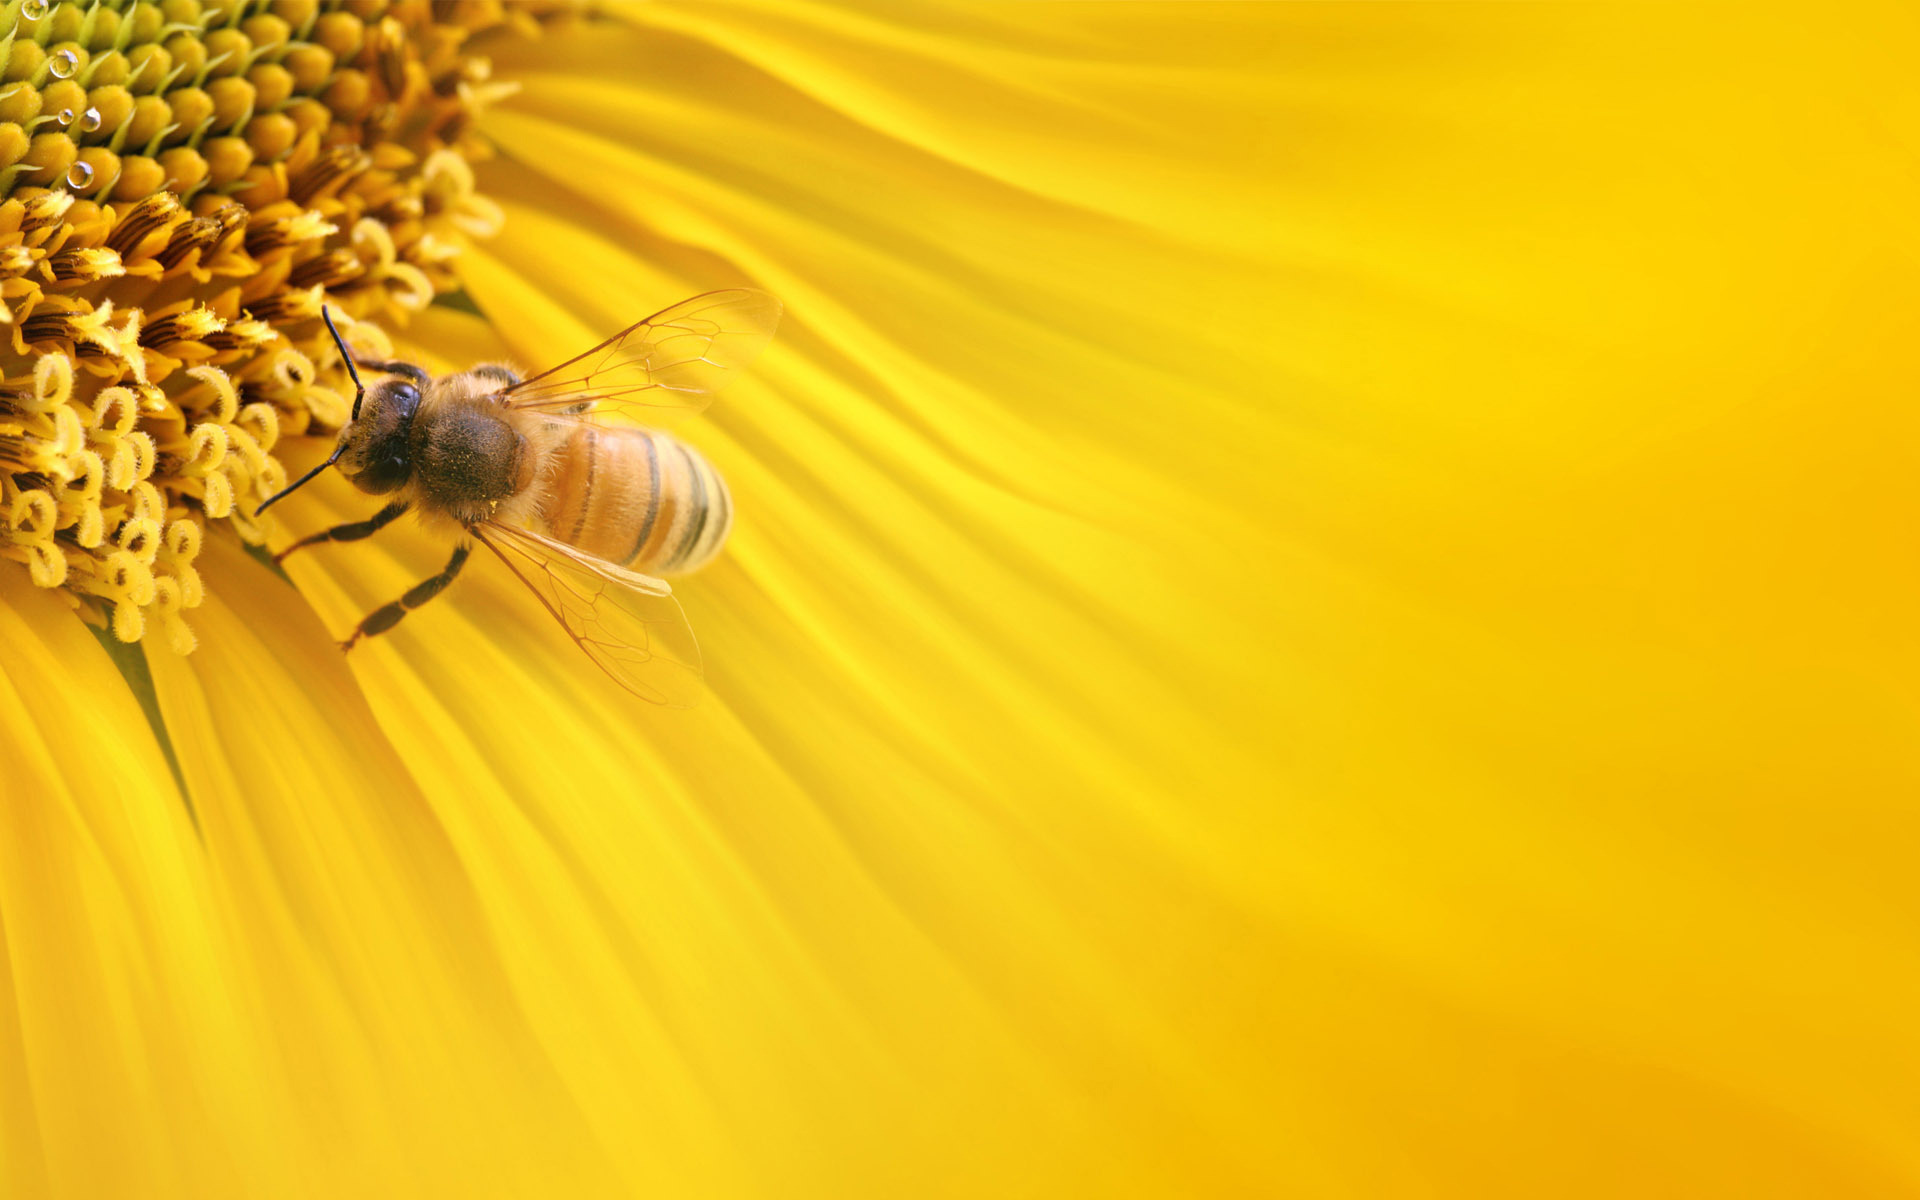 100 Bee Pictures  Download Free Images  Stock Photos on Unsplash